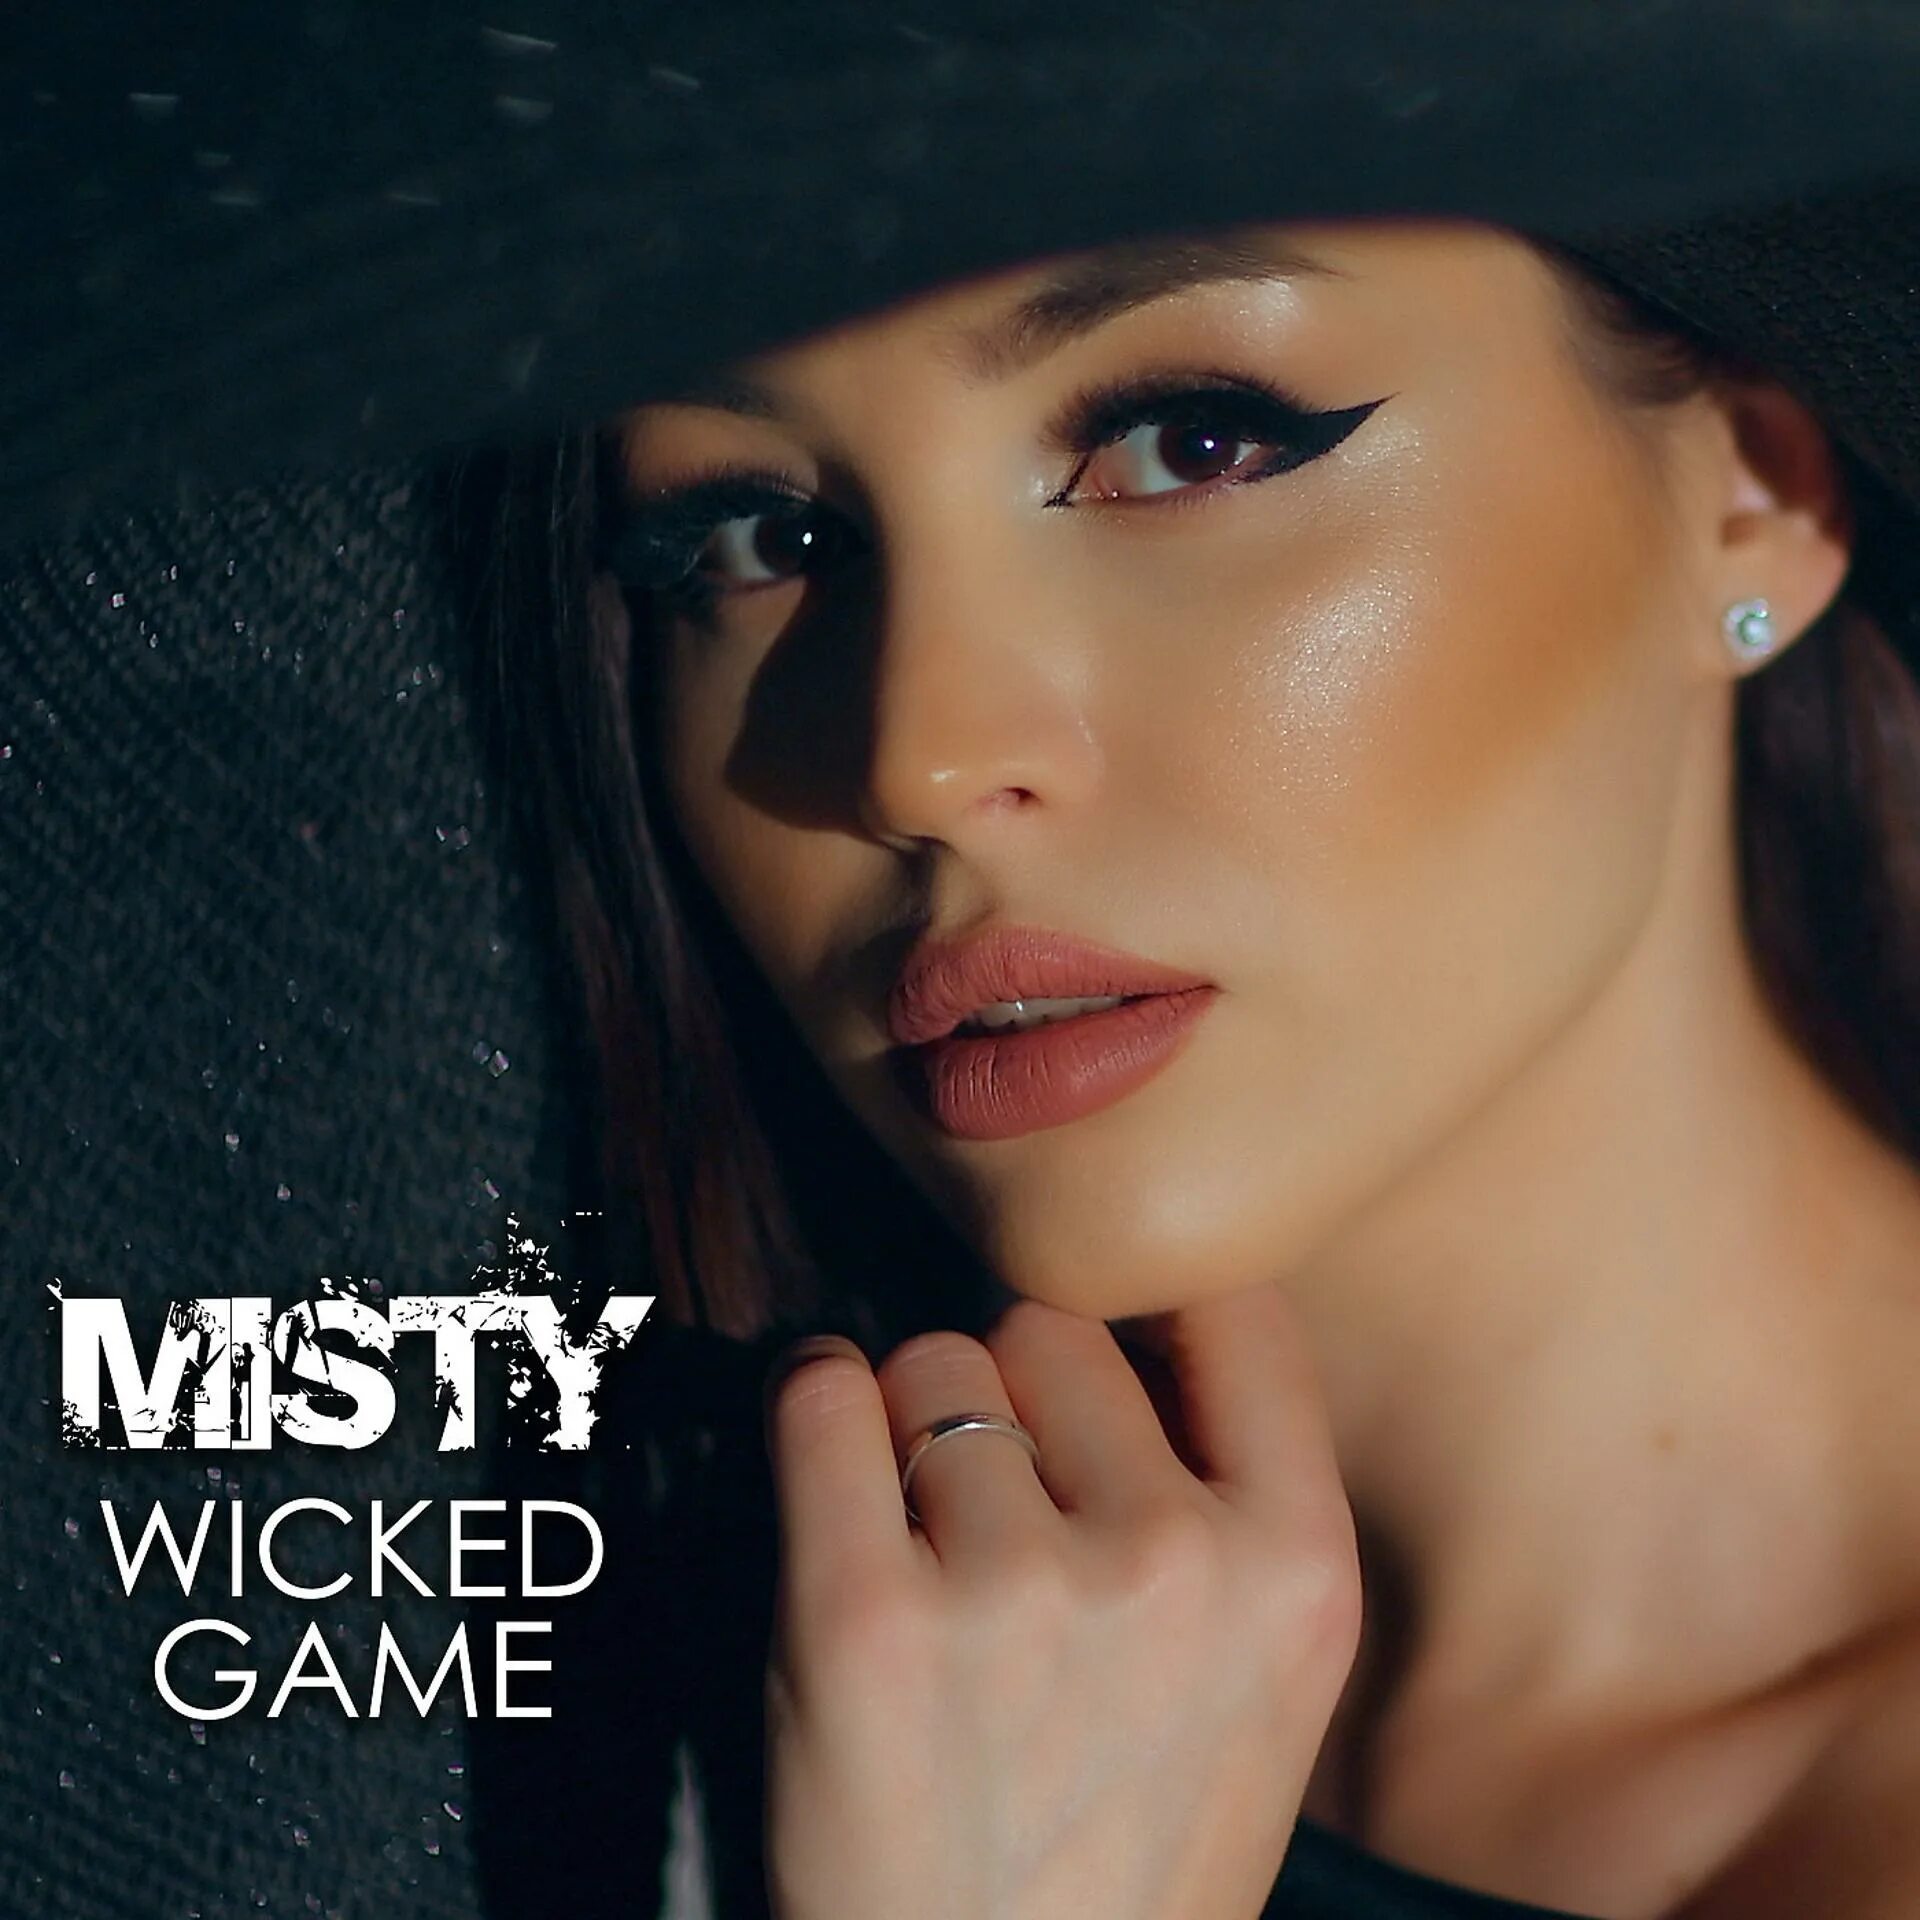 Wicked game mix. Wicked game. Misty & Deep Orient - Wicked game (Cover). Wicked game образ.